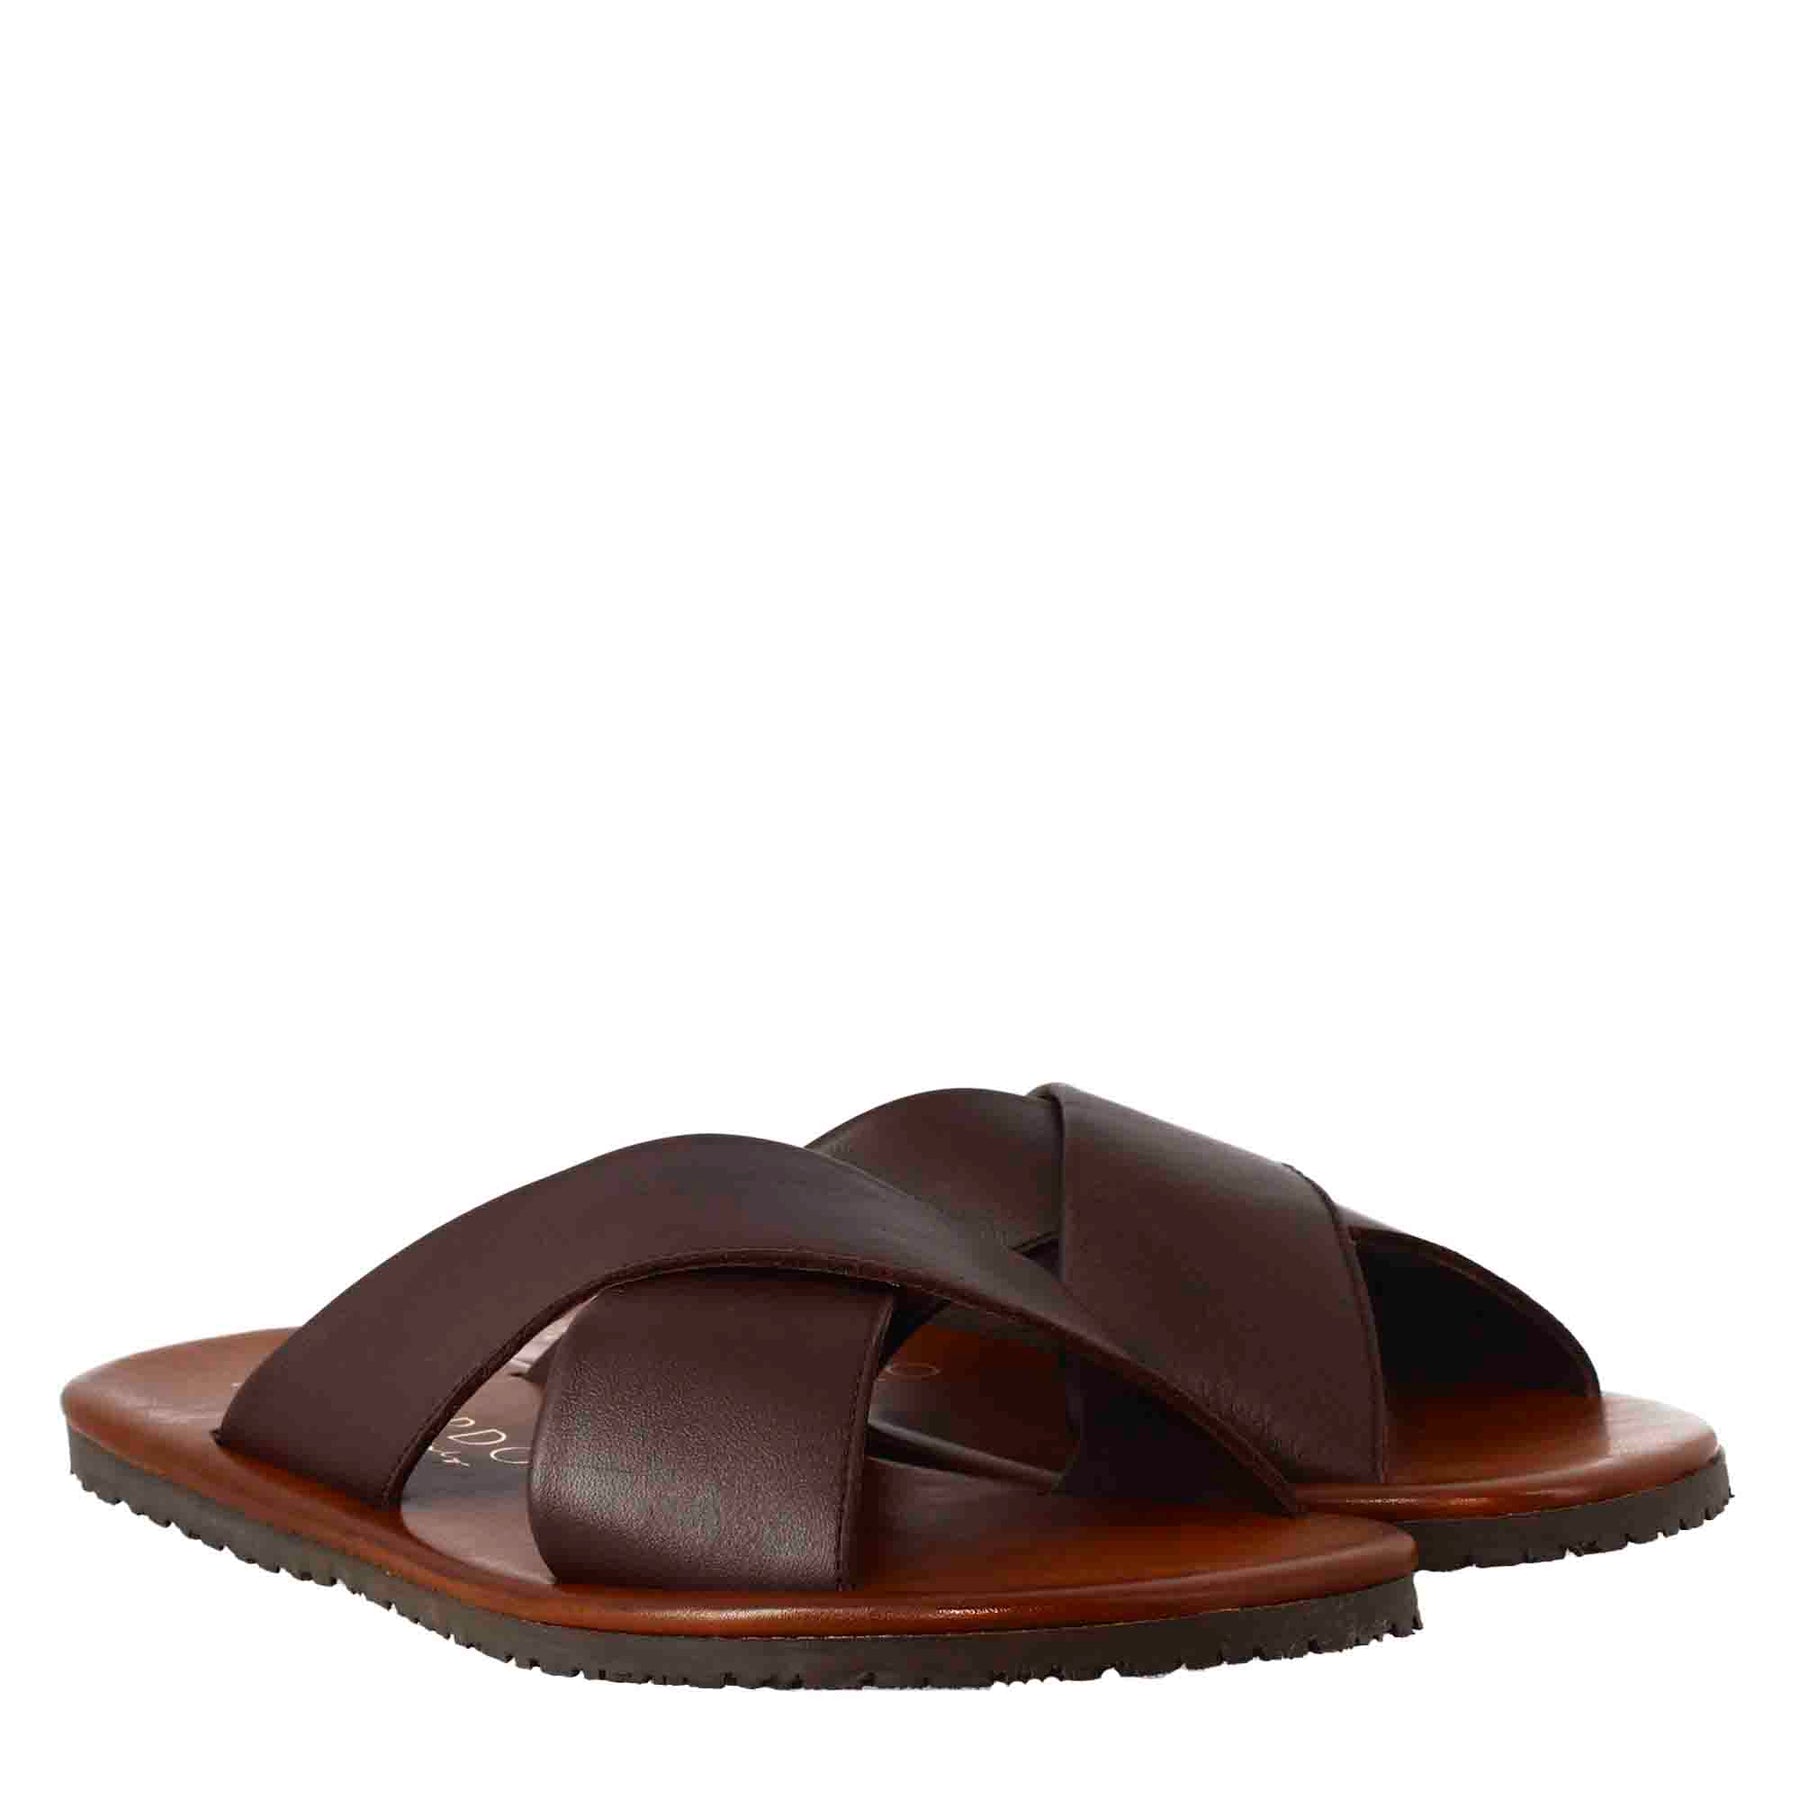 Men's handmade slipper sandals with crossed bands in brown leather